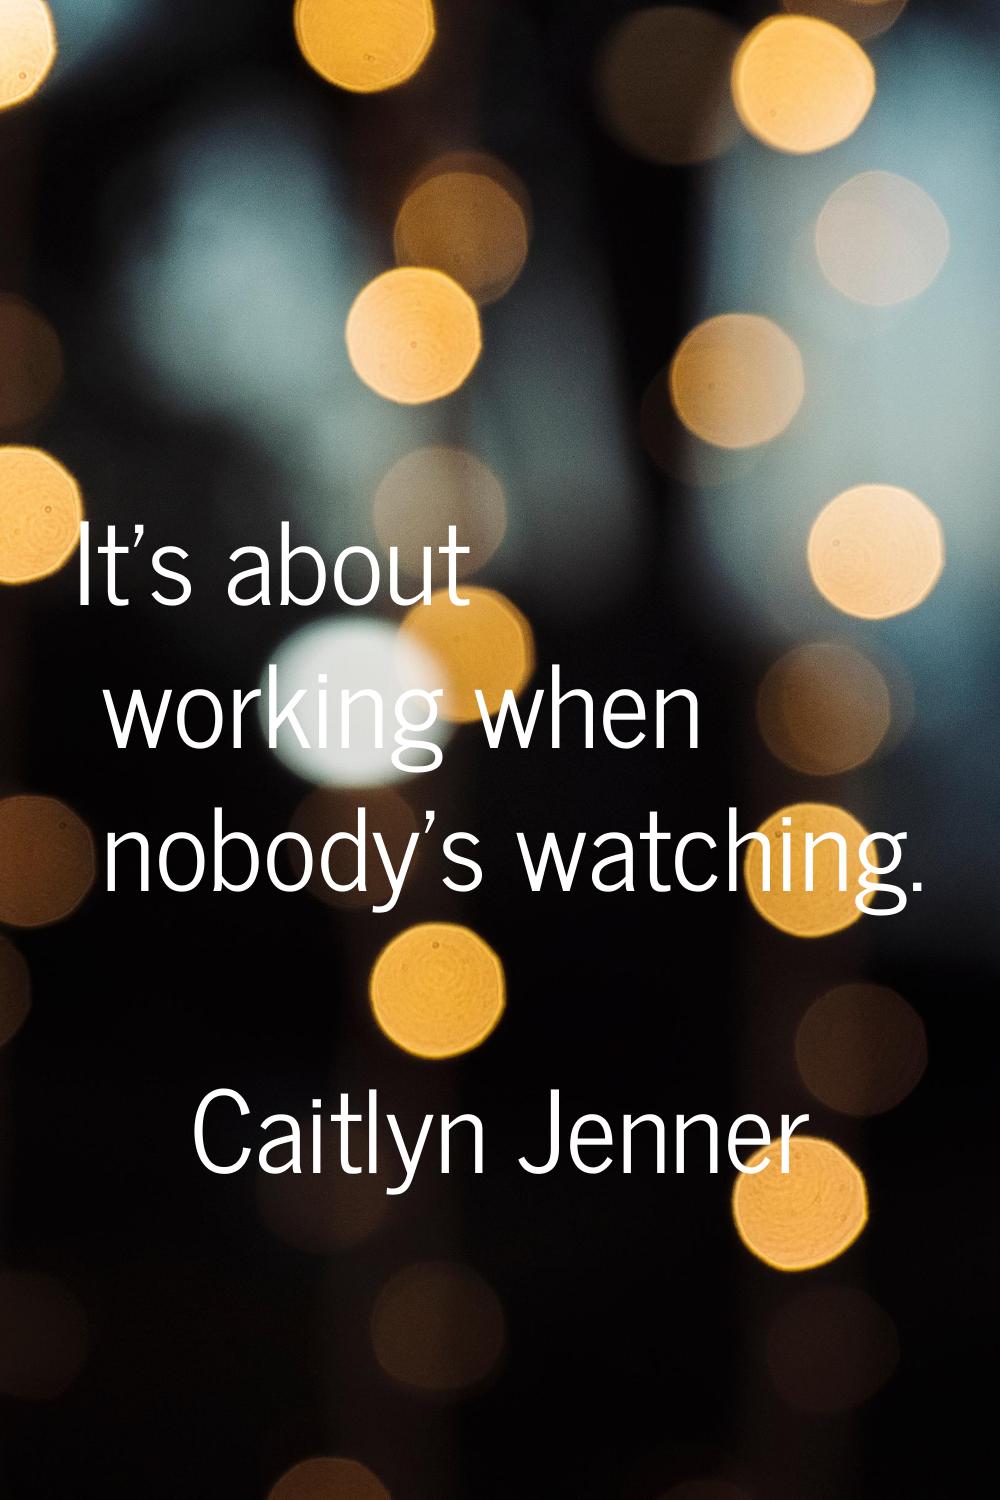 It's about working when nobody's watching.